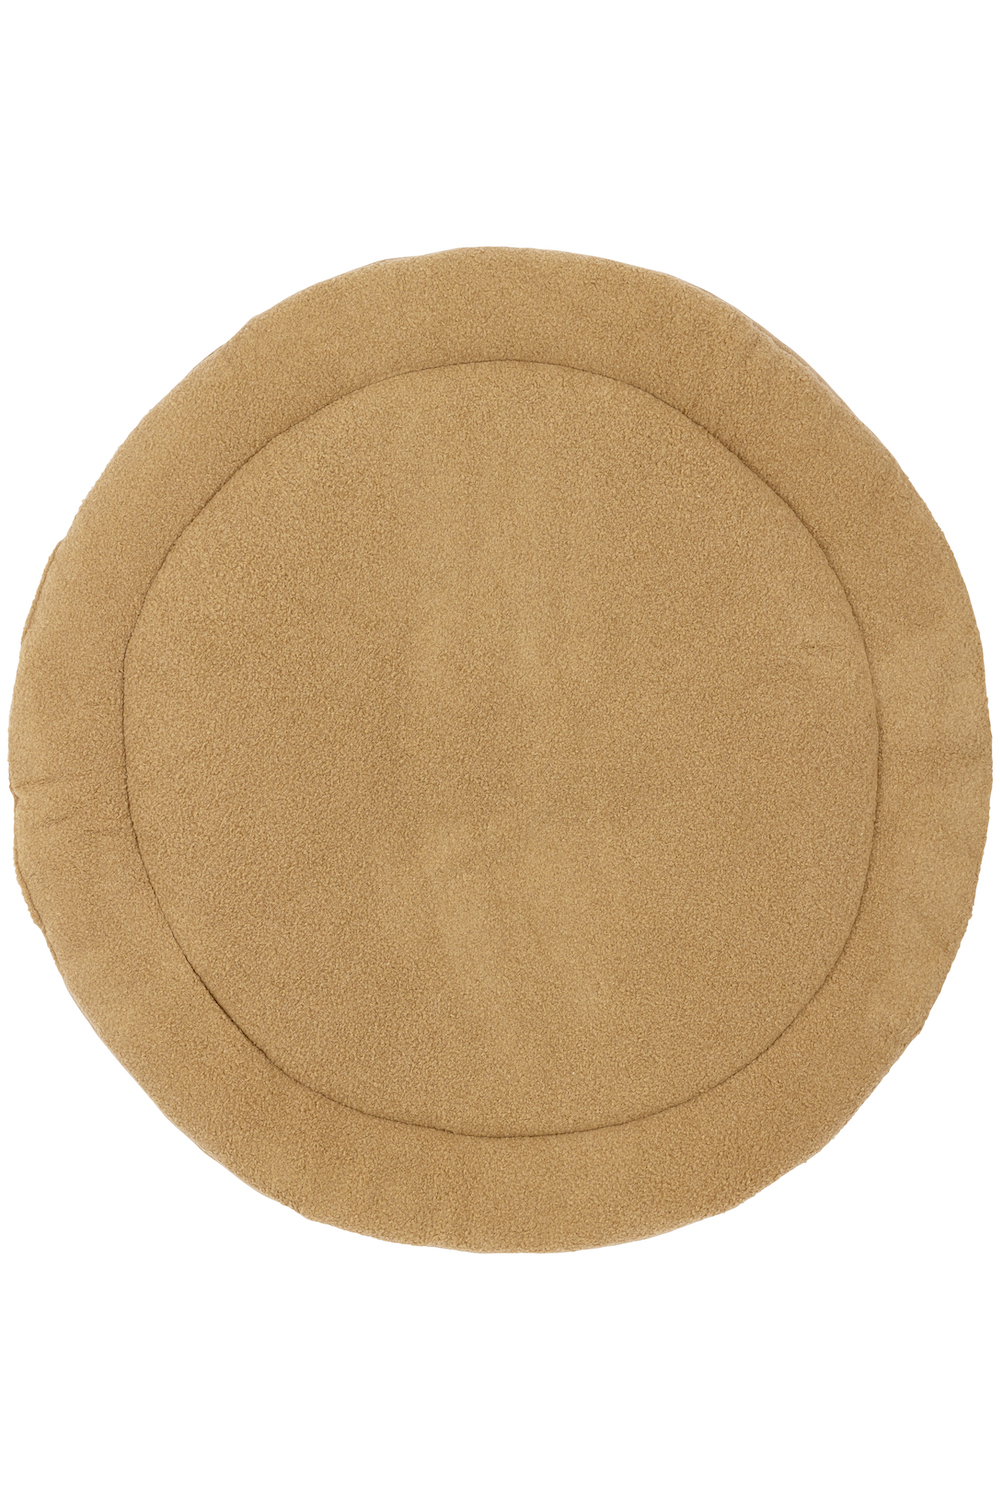 Boxkleed rond - toffee - ⌀95cm